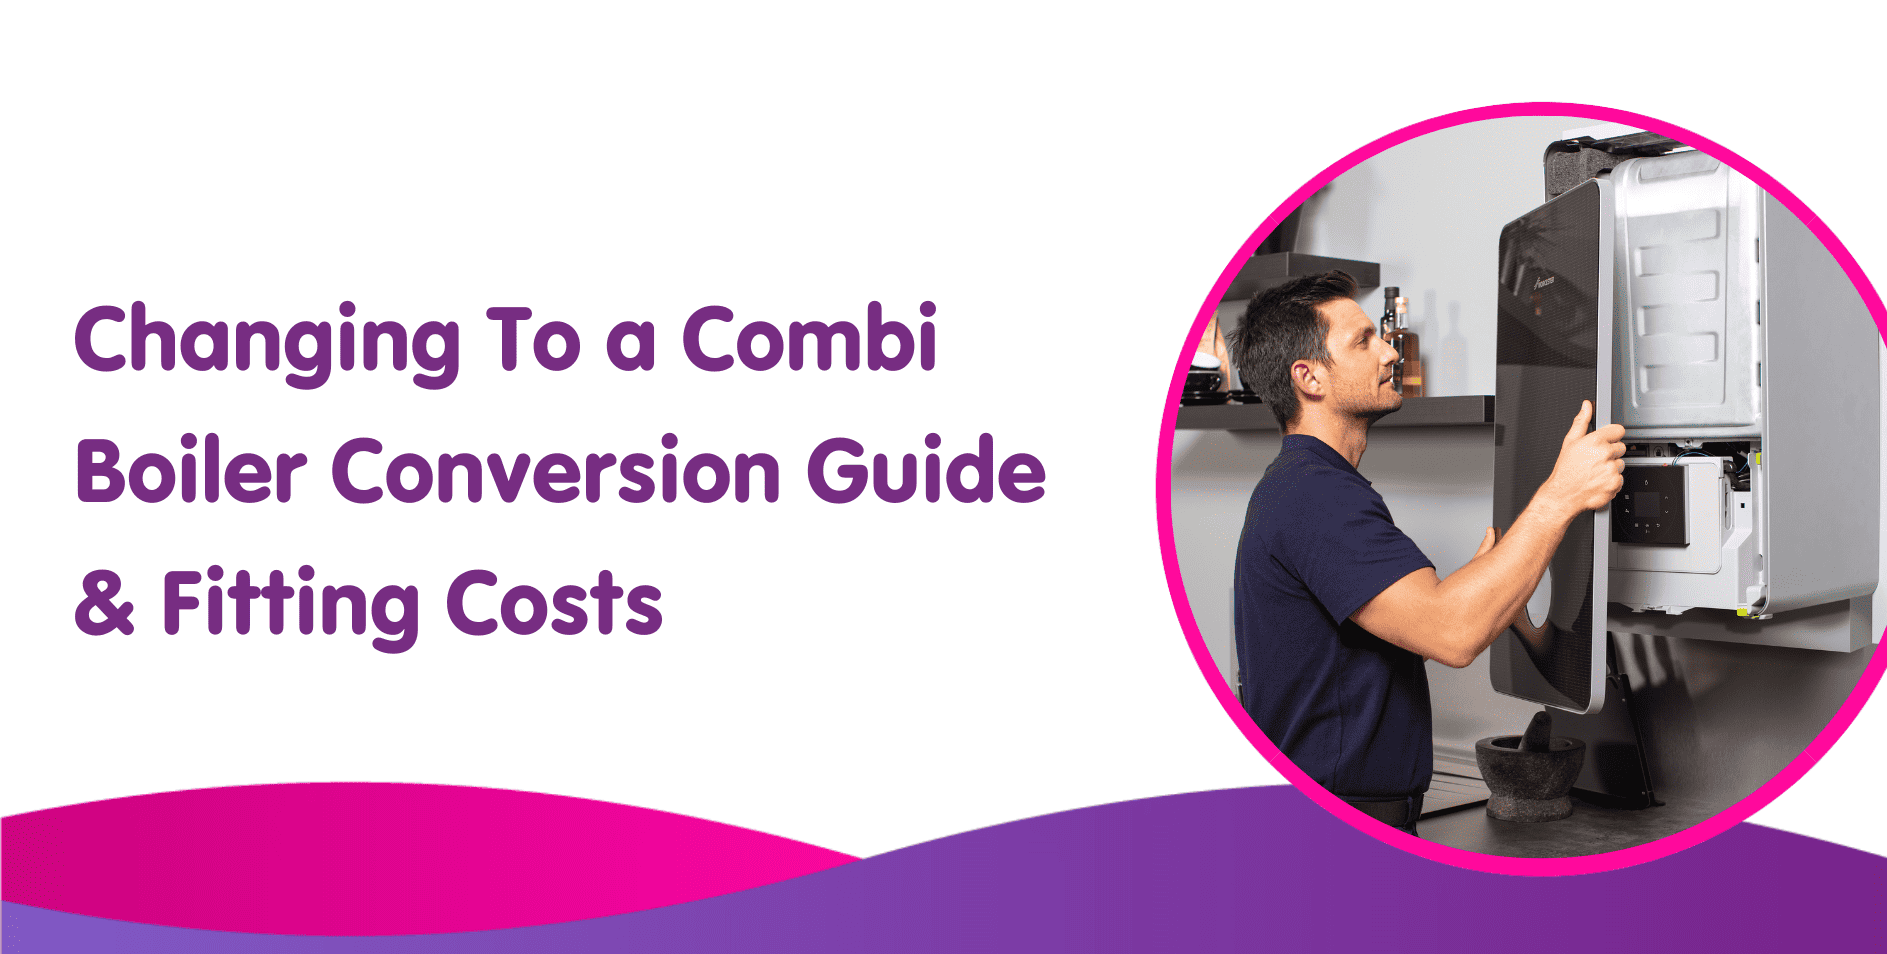 Changing To a Combi Boiler Conversion Guide & Fitting Costs